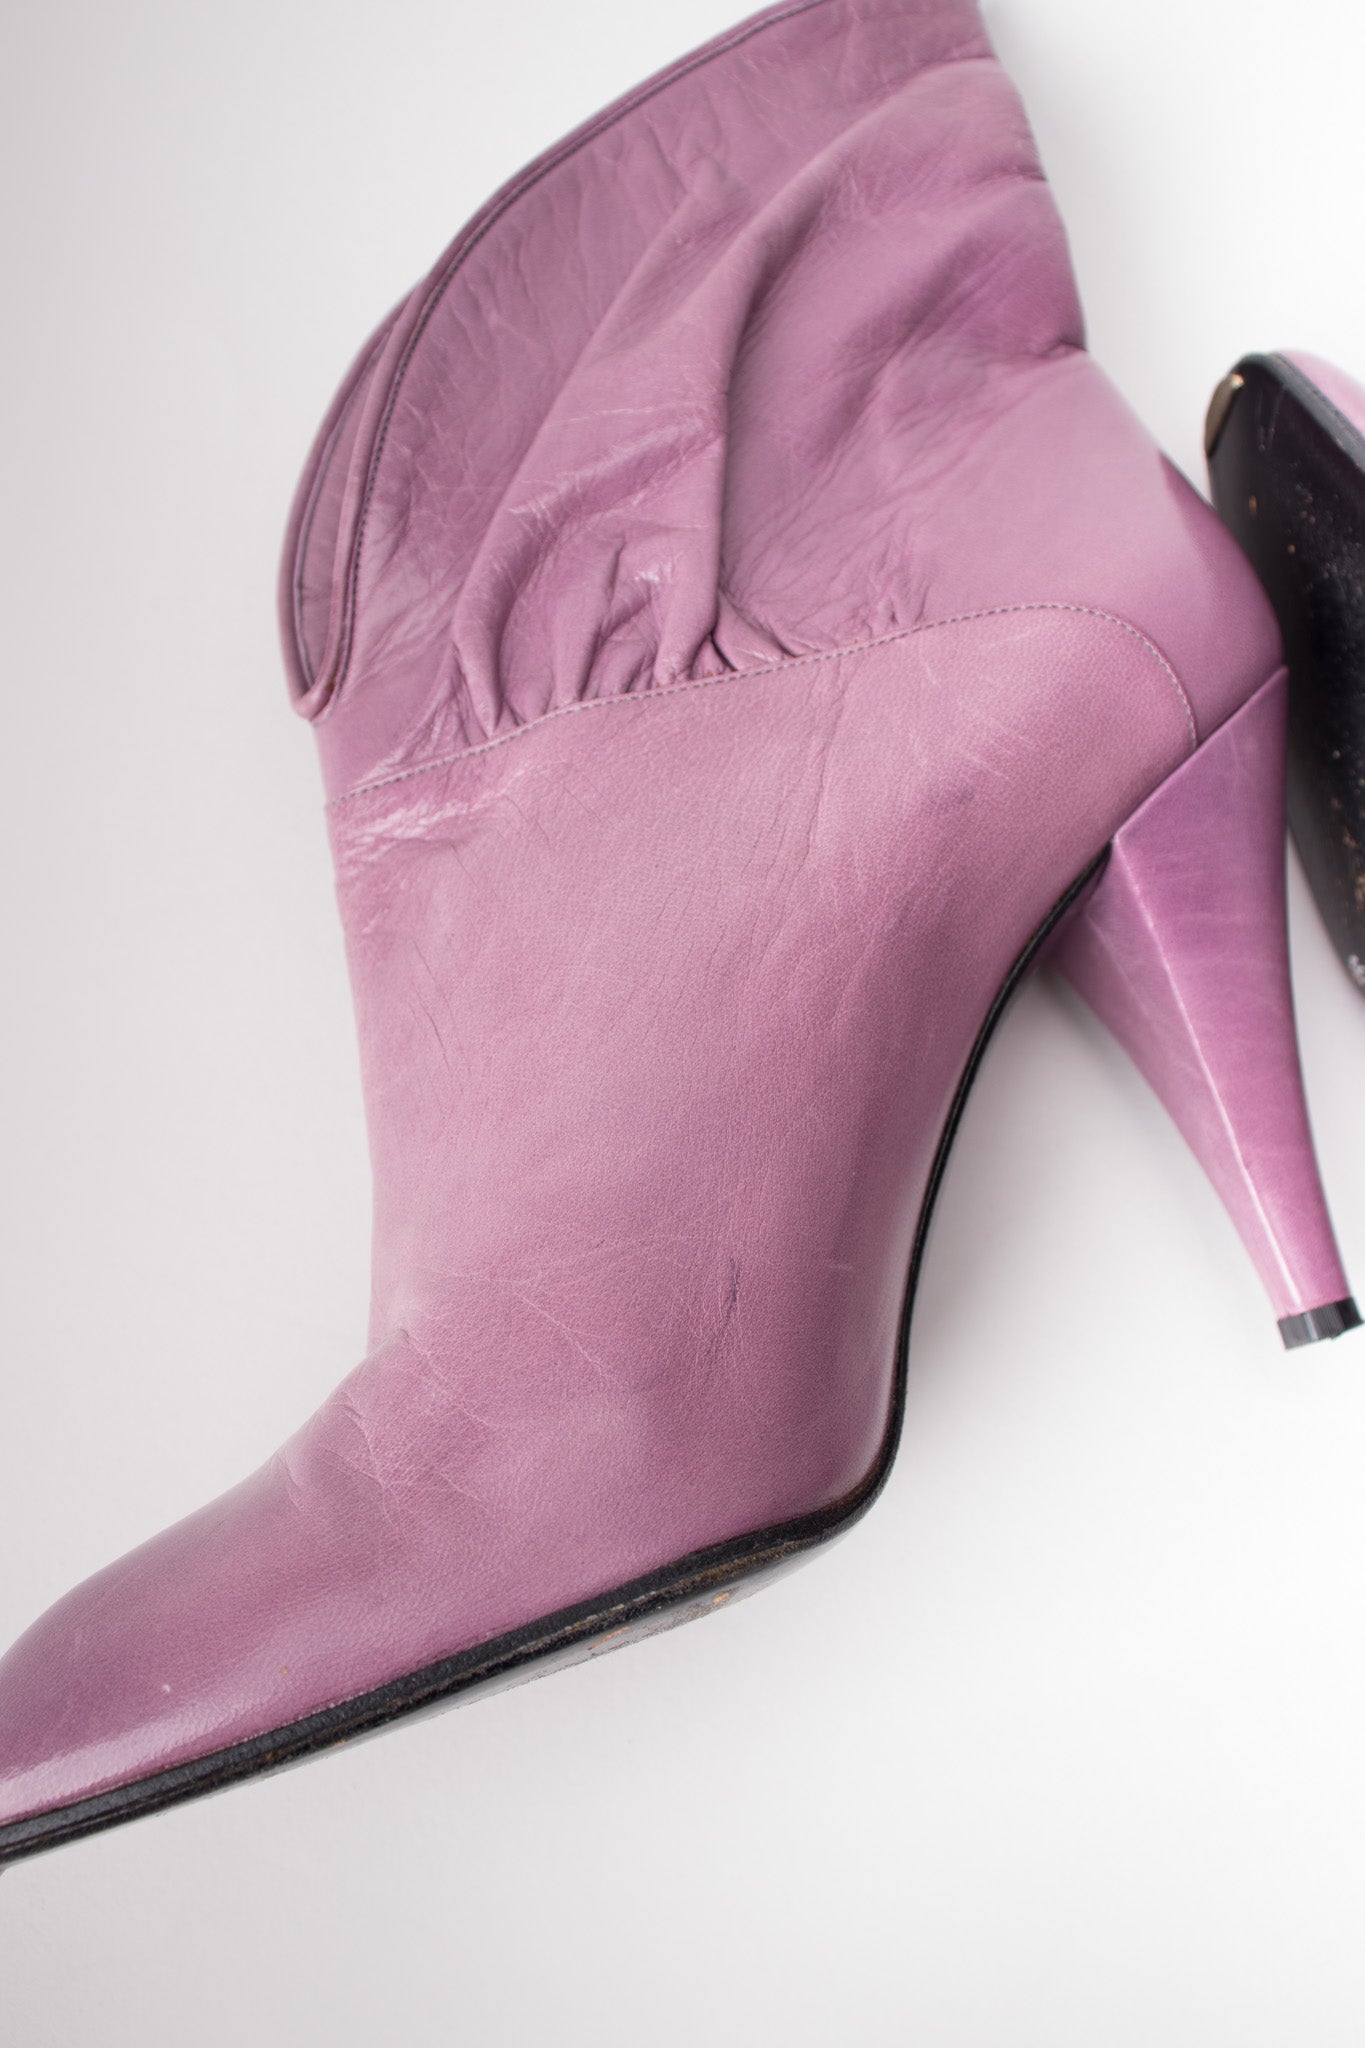 Erik's Shoes Lilac Purple Cuffed Collar Ankle Boots Booties